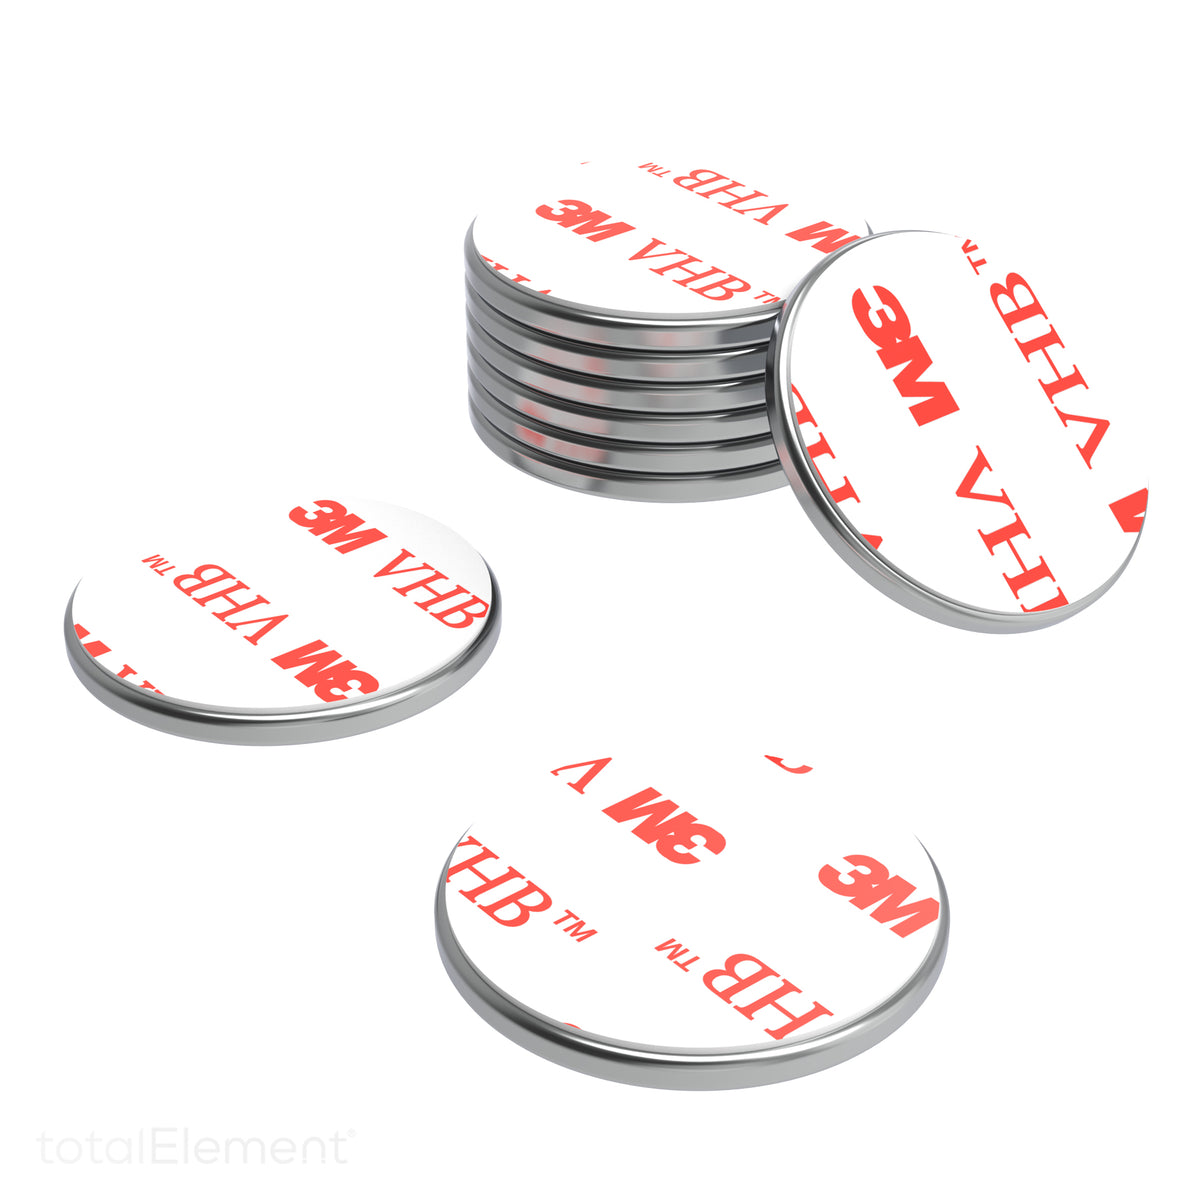 Round Magnet Discs With Adhesive Backing. Many sizes & pack quantities.  Great for Crafts! ( 1 Inch - 50 Pack)